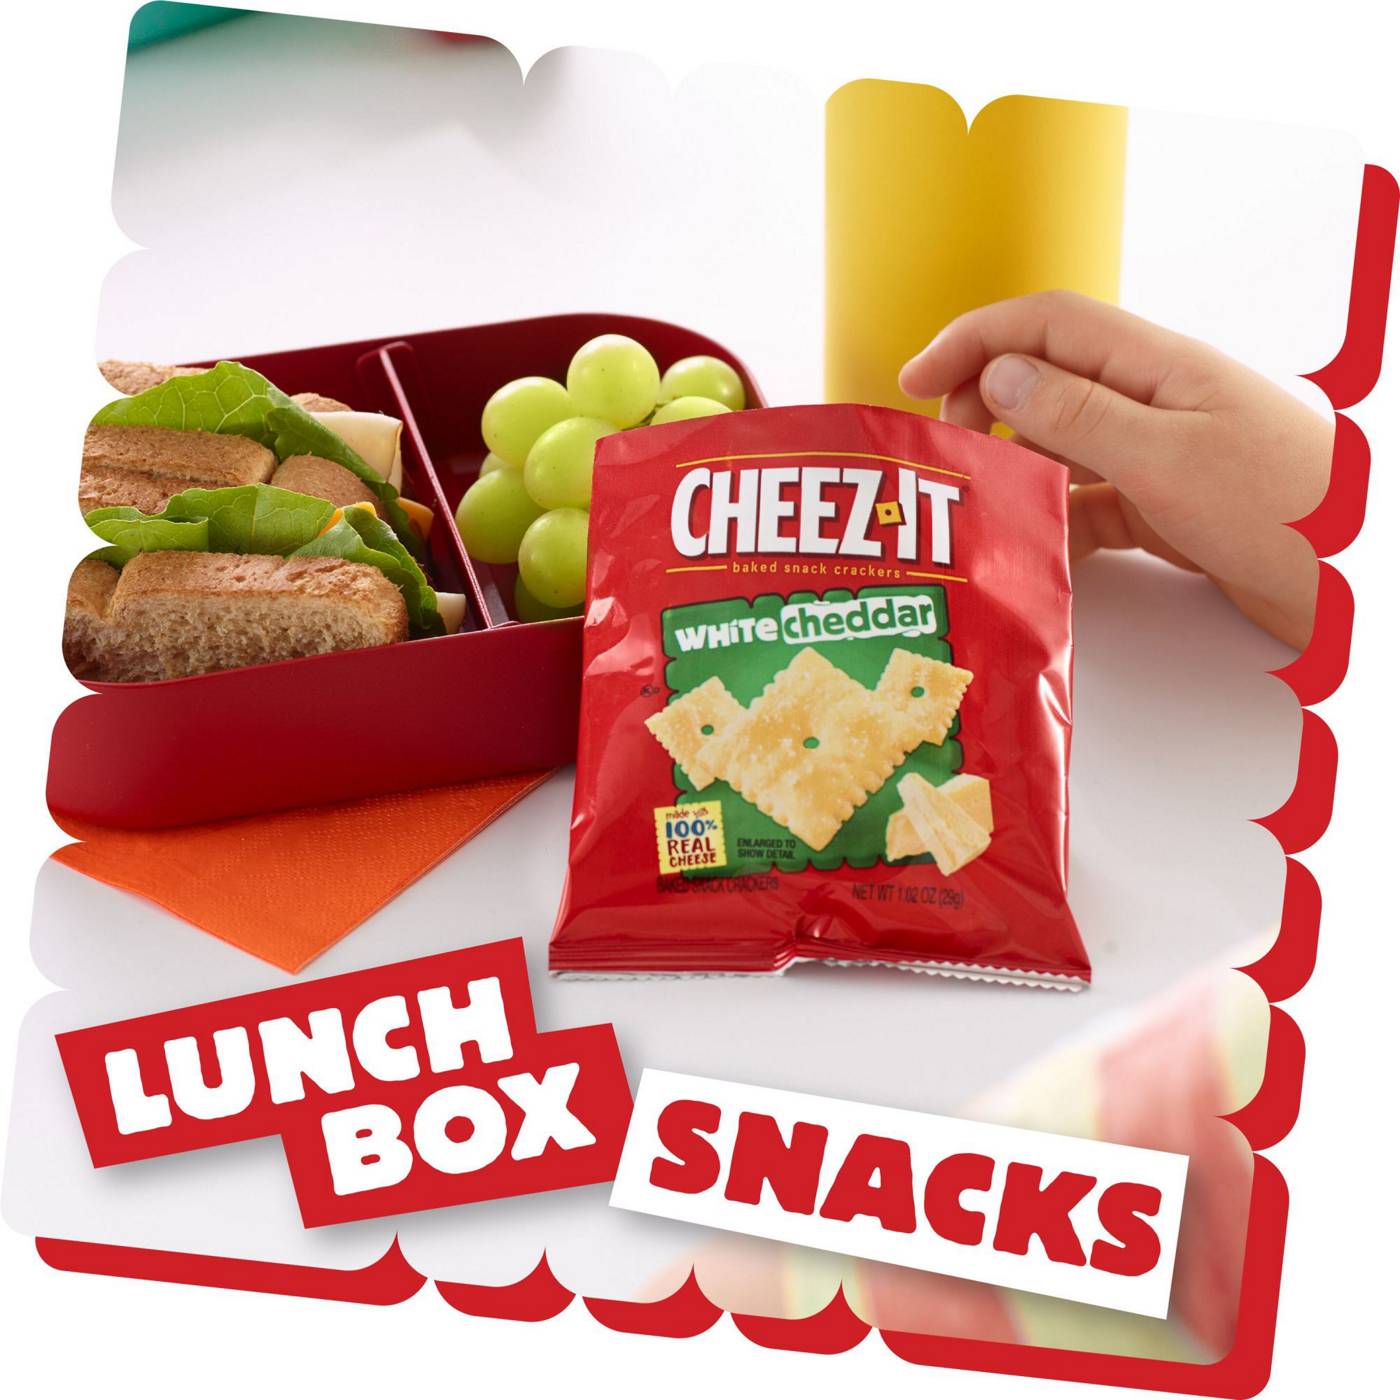 Cheez-It White Cheddar Baked Snack Crackers; image 3 of 4